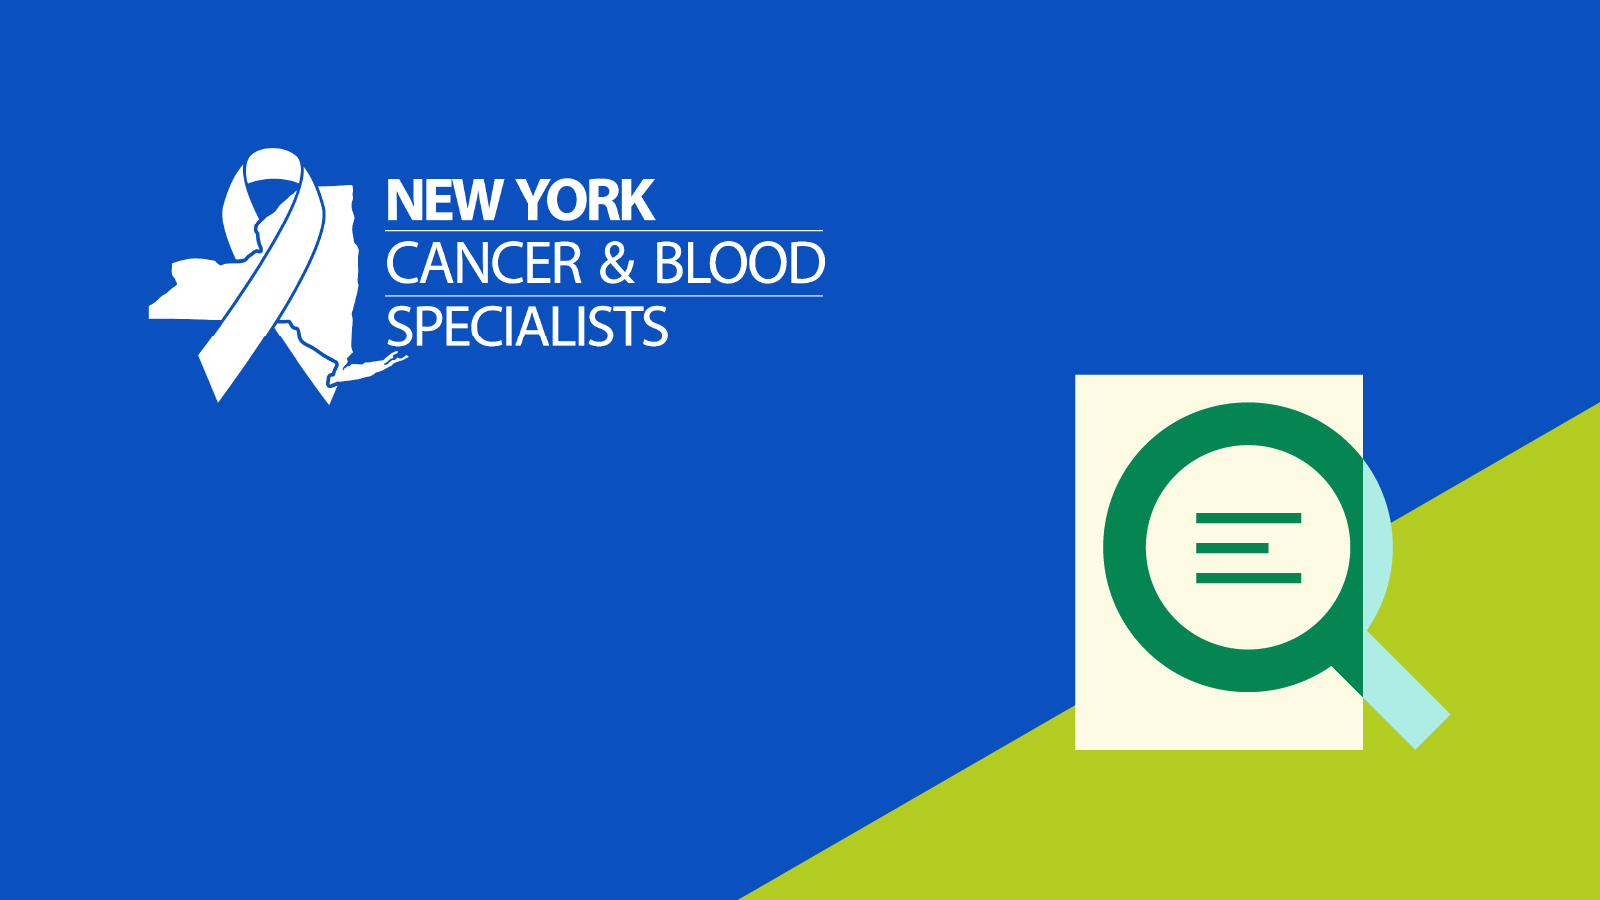 Implementing telemedicine and remote care in response to COVID-19: New York Cancer & Blood Specialists and Flatiron Revenue Cycle Management